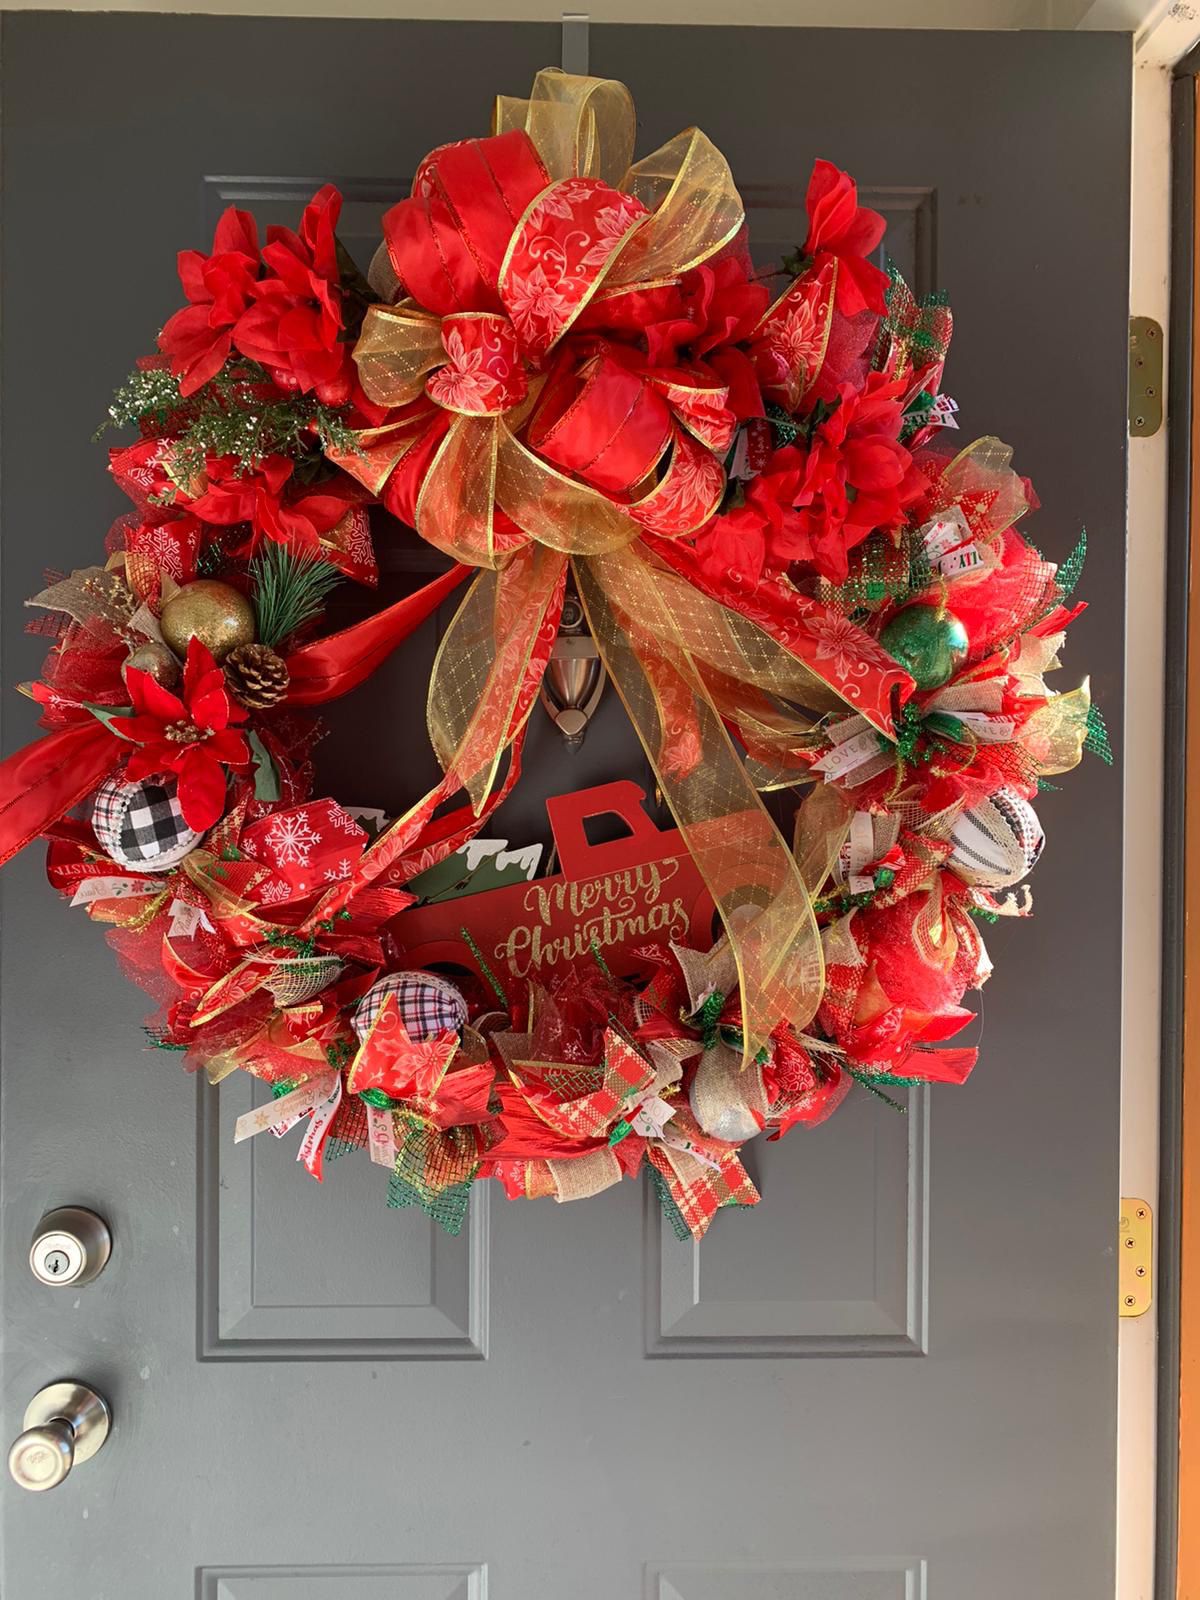 Wreath with mesh ribbons